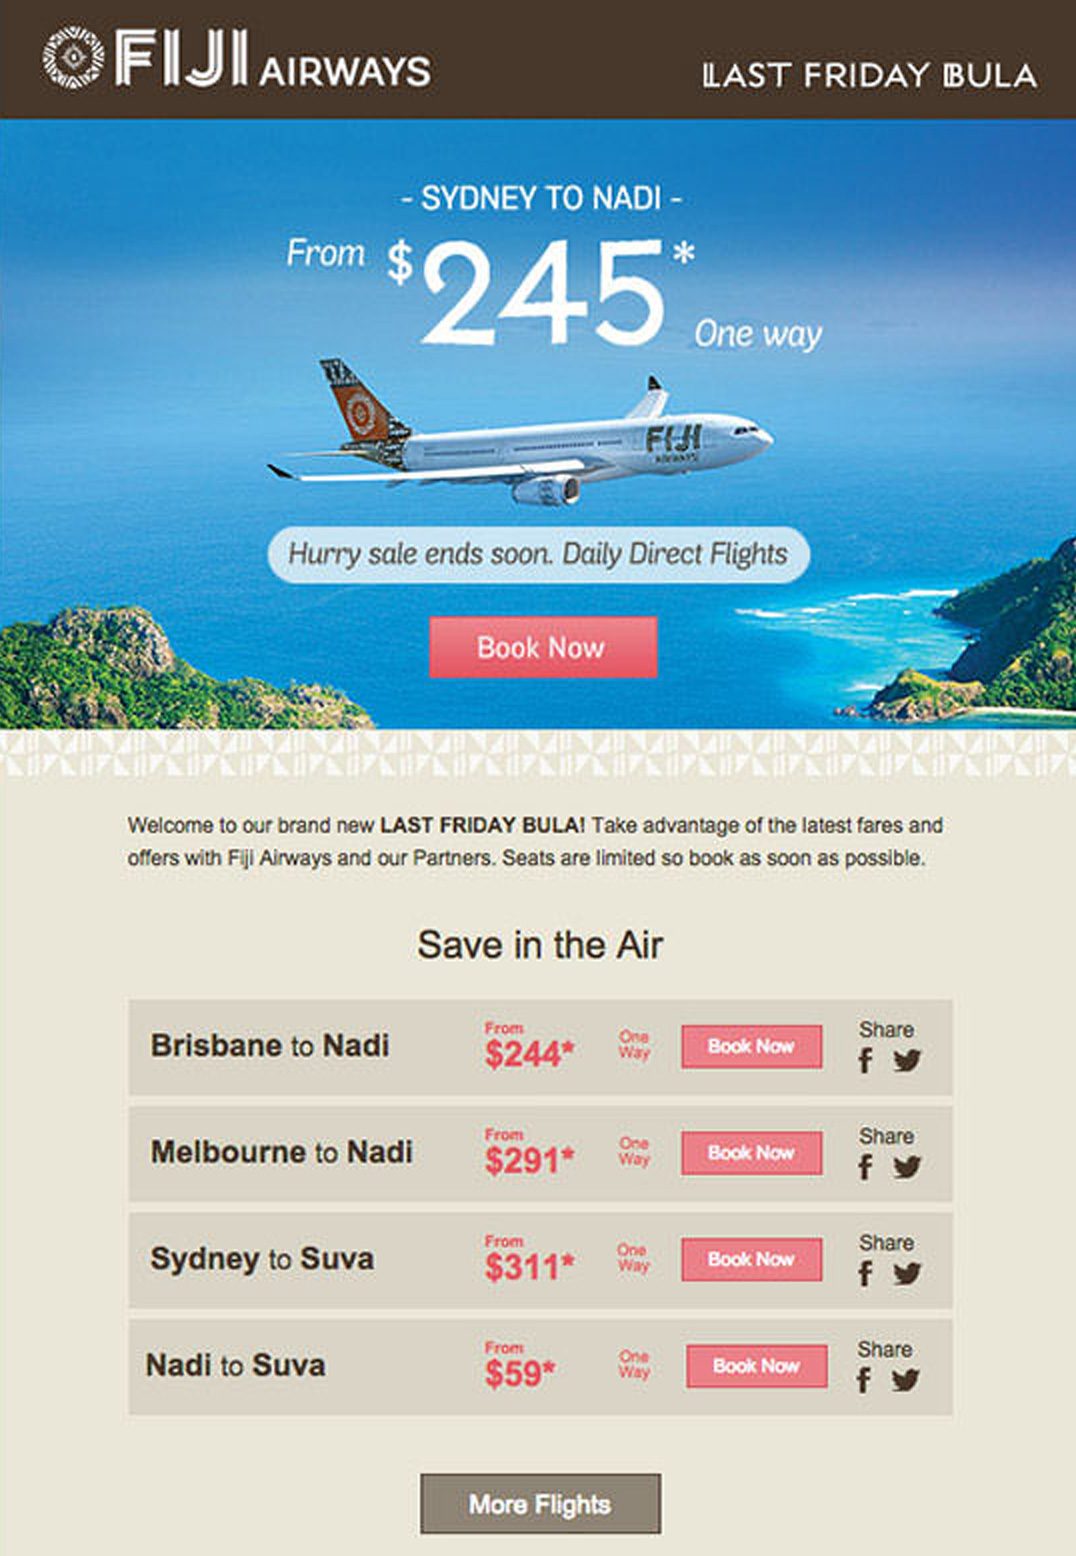 Email from Fiji Airways with flight deals from Nadi to Australia